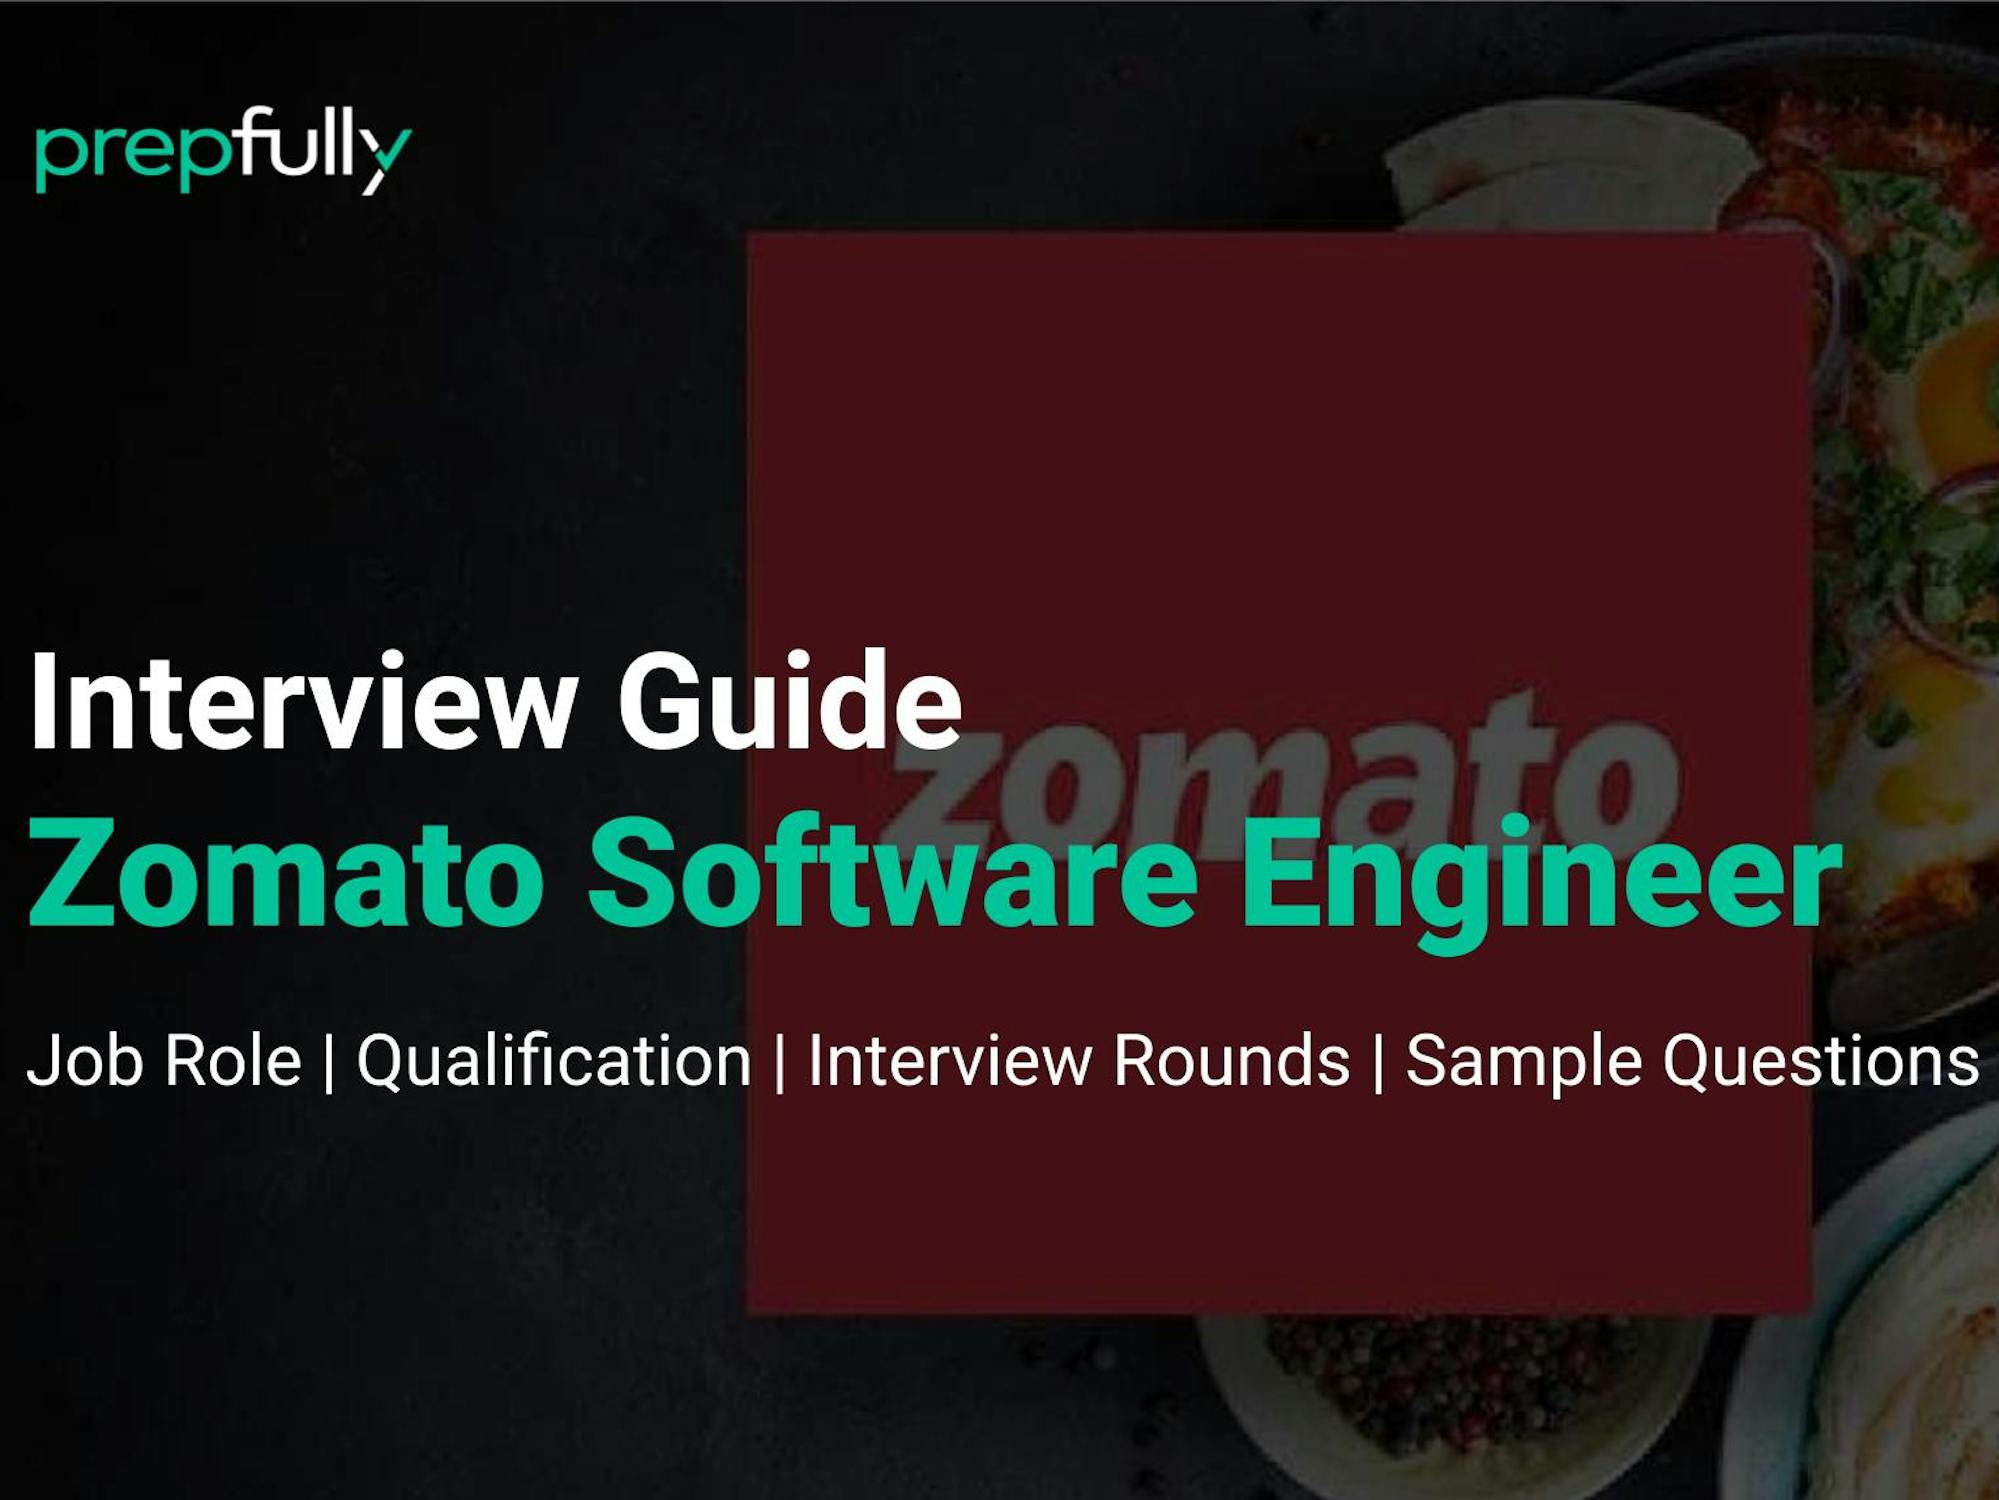 Zomato Software Engineer interview process